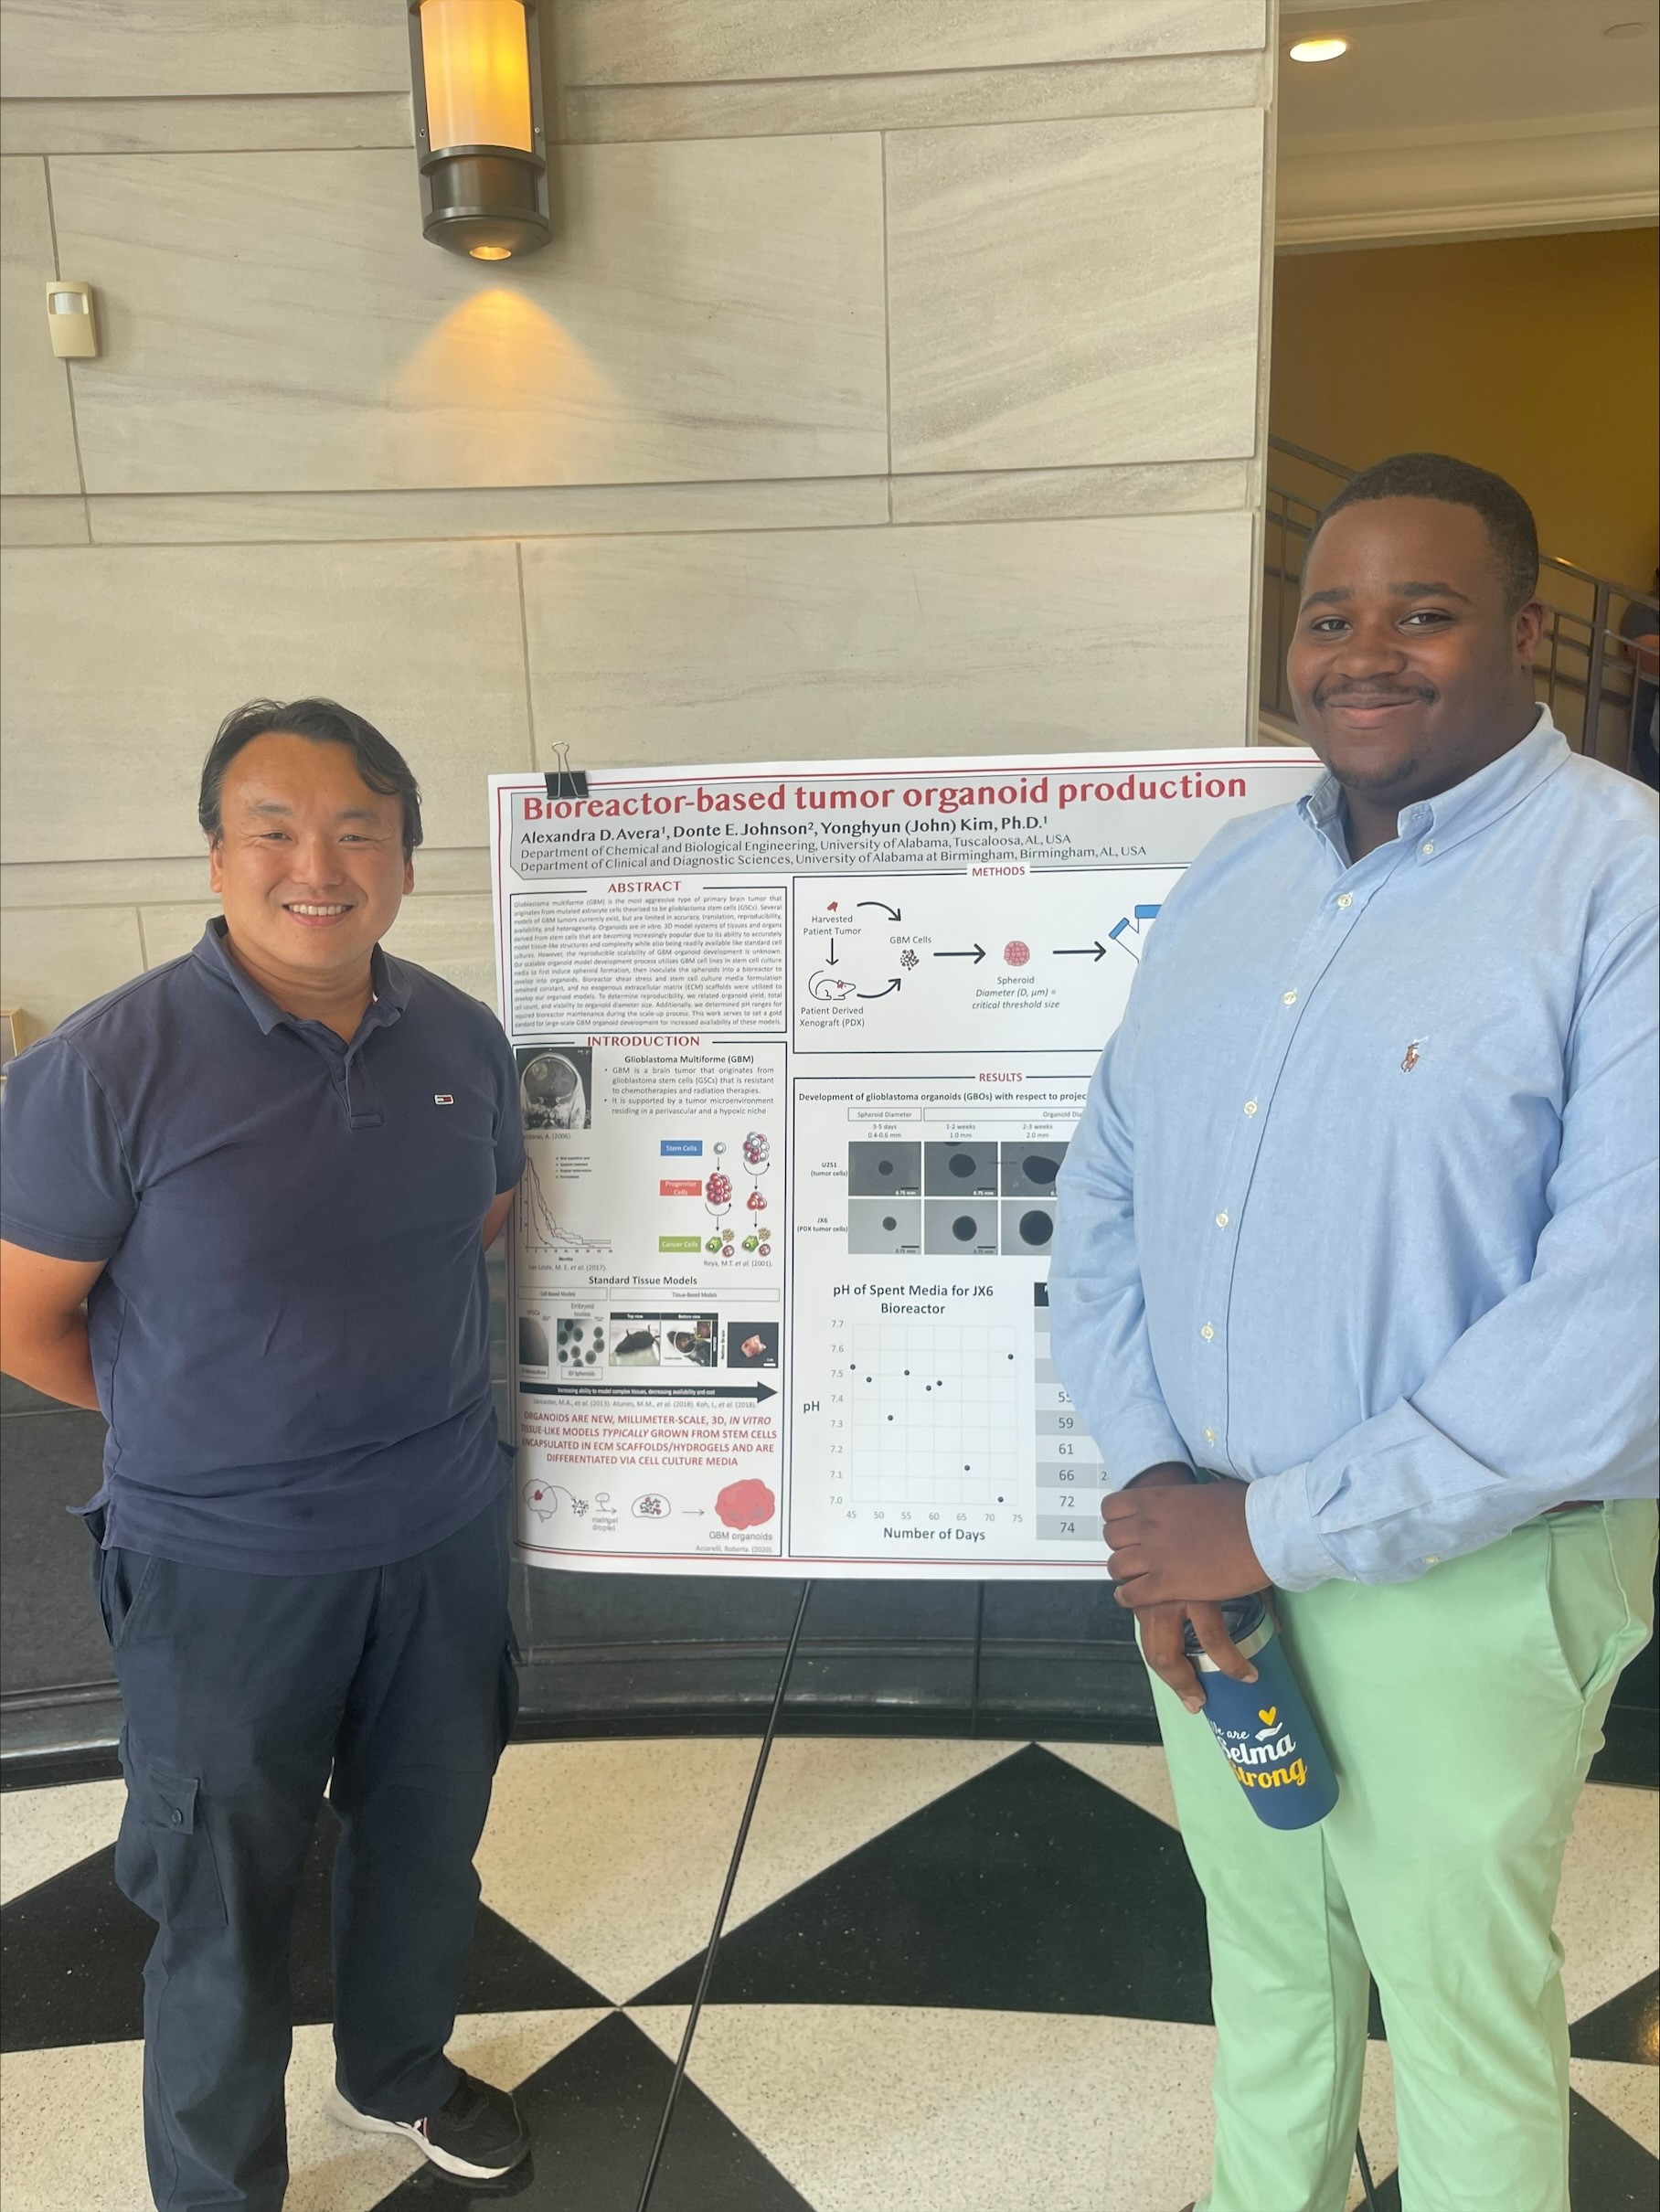 A male professor and a male student standing in front of a research poster